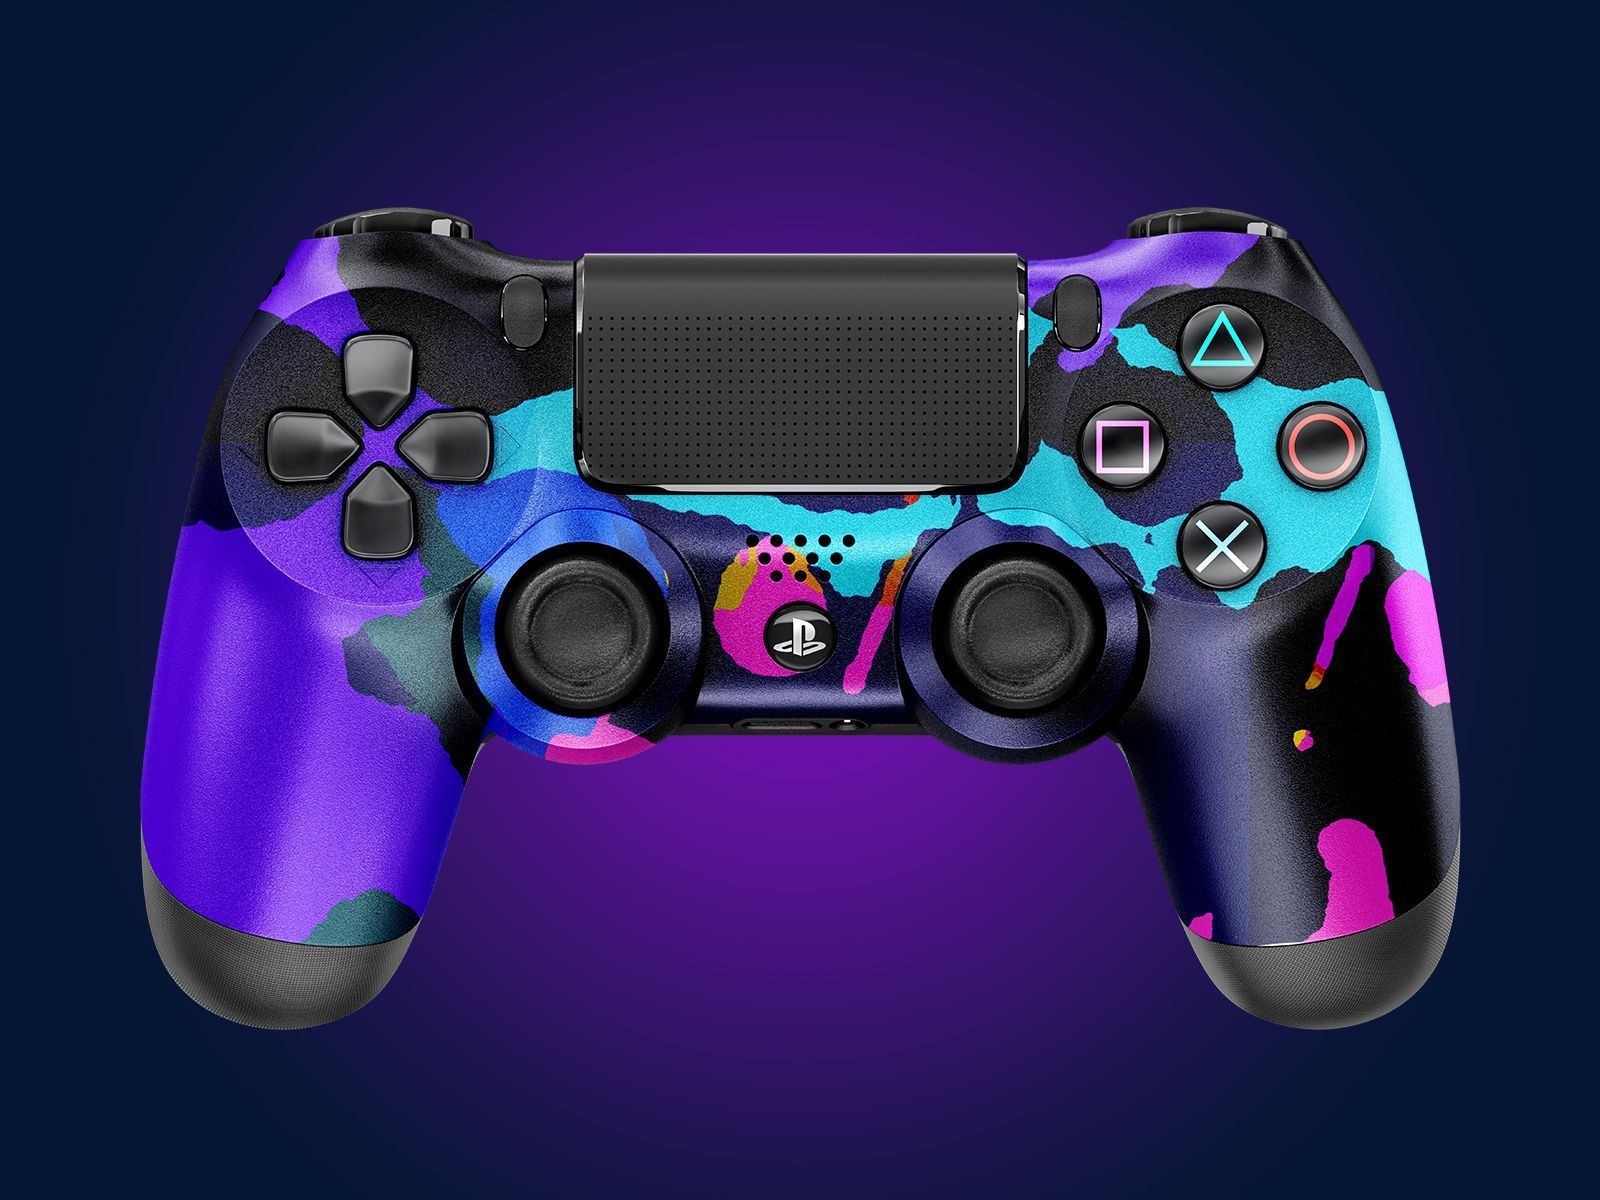 Mix It Up. PS4 Controller. Ps4 controller, Cool ps4 controllers, Ps4